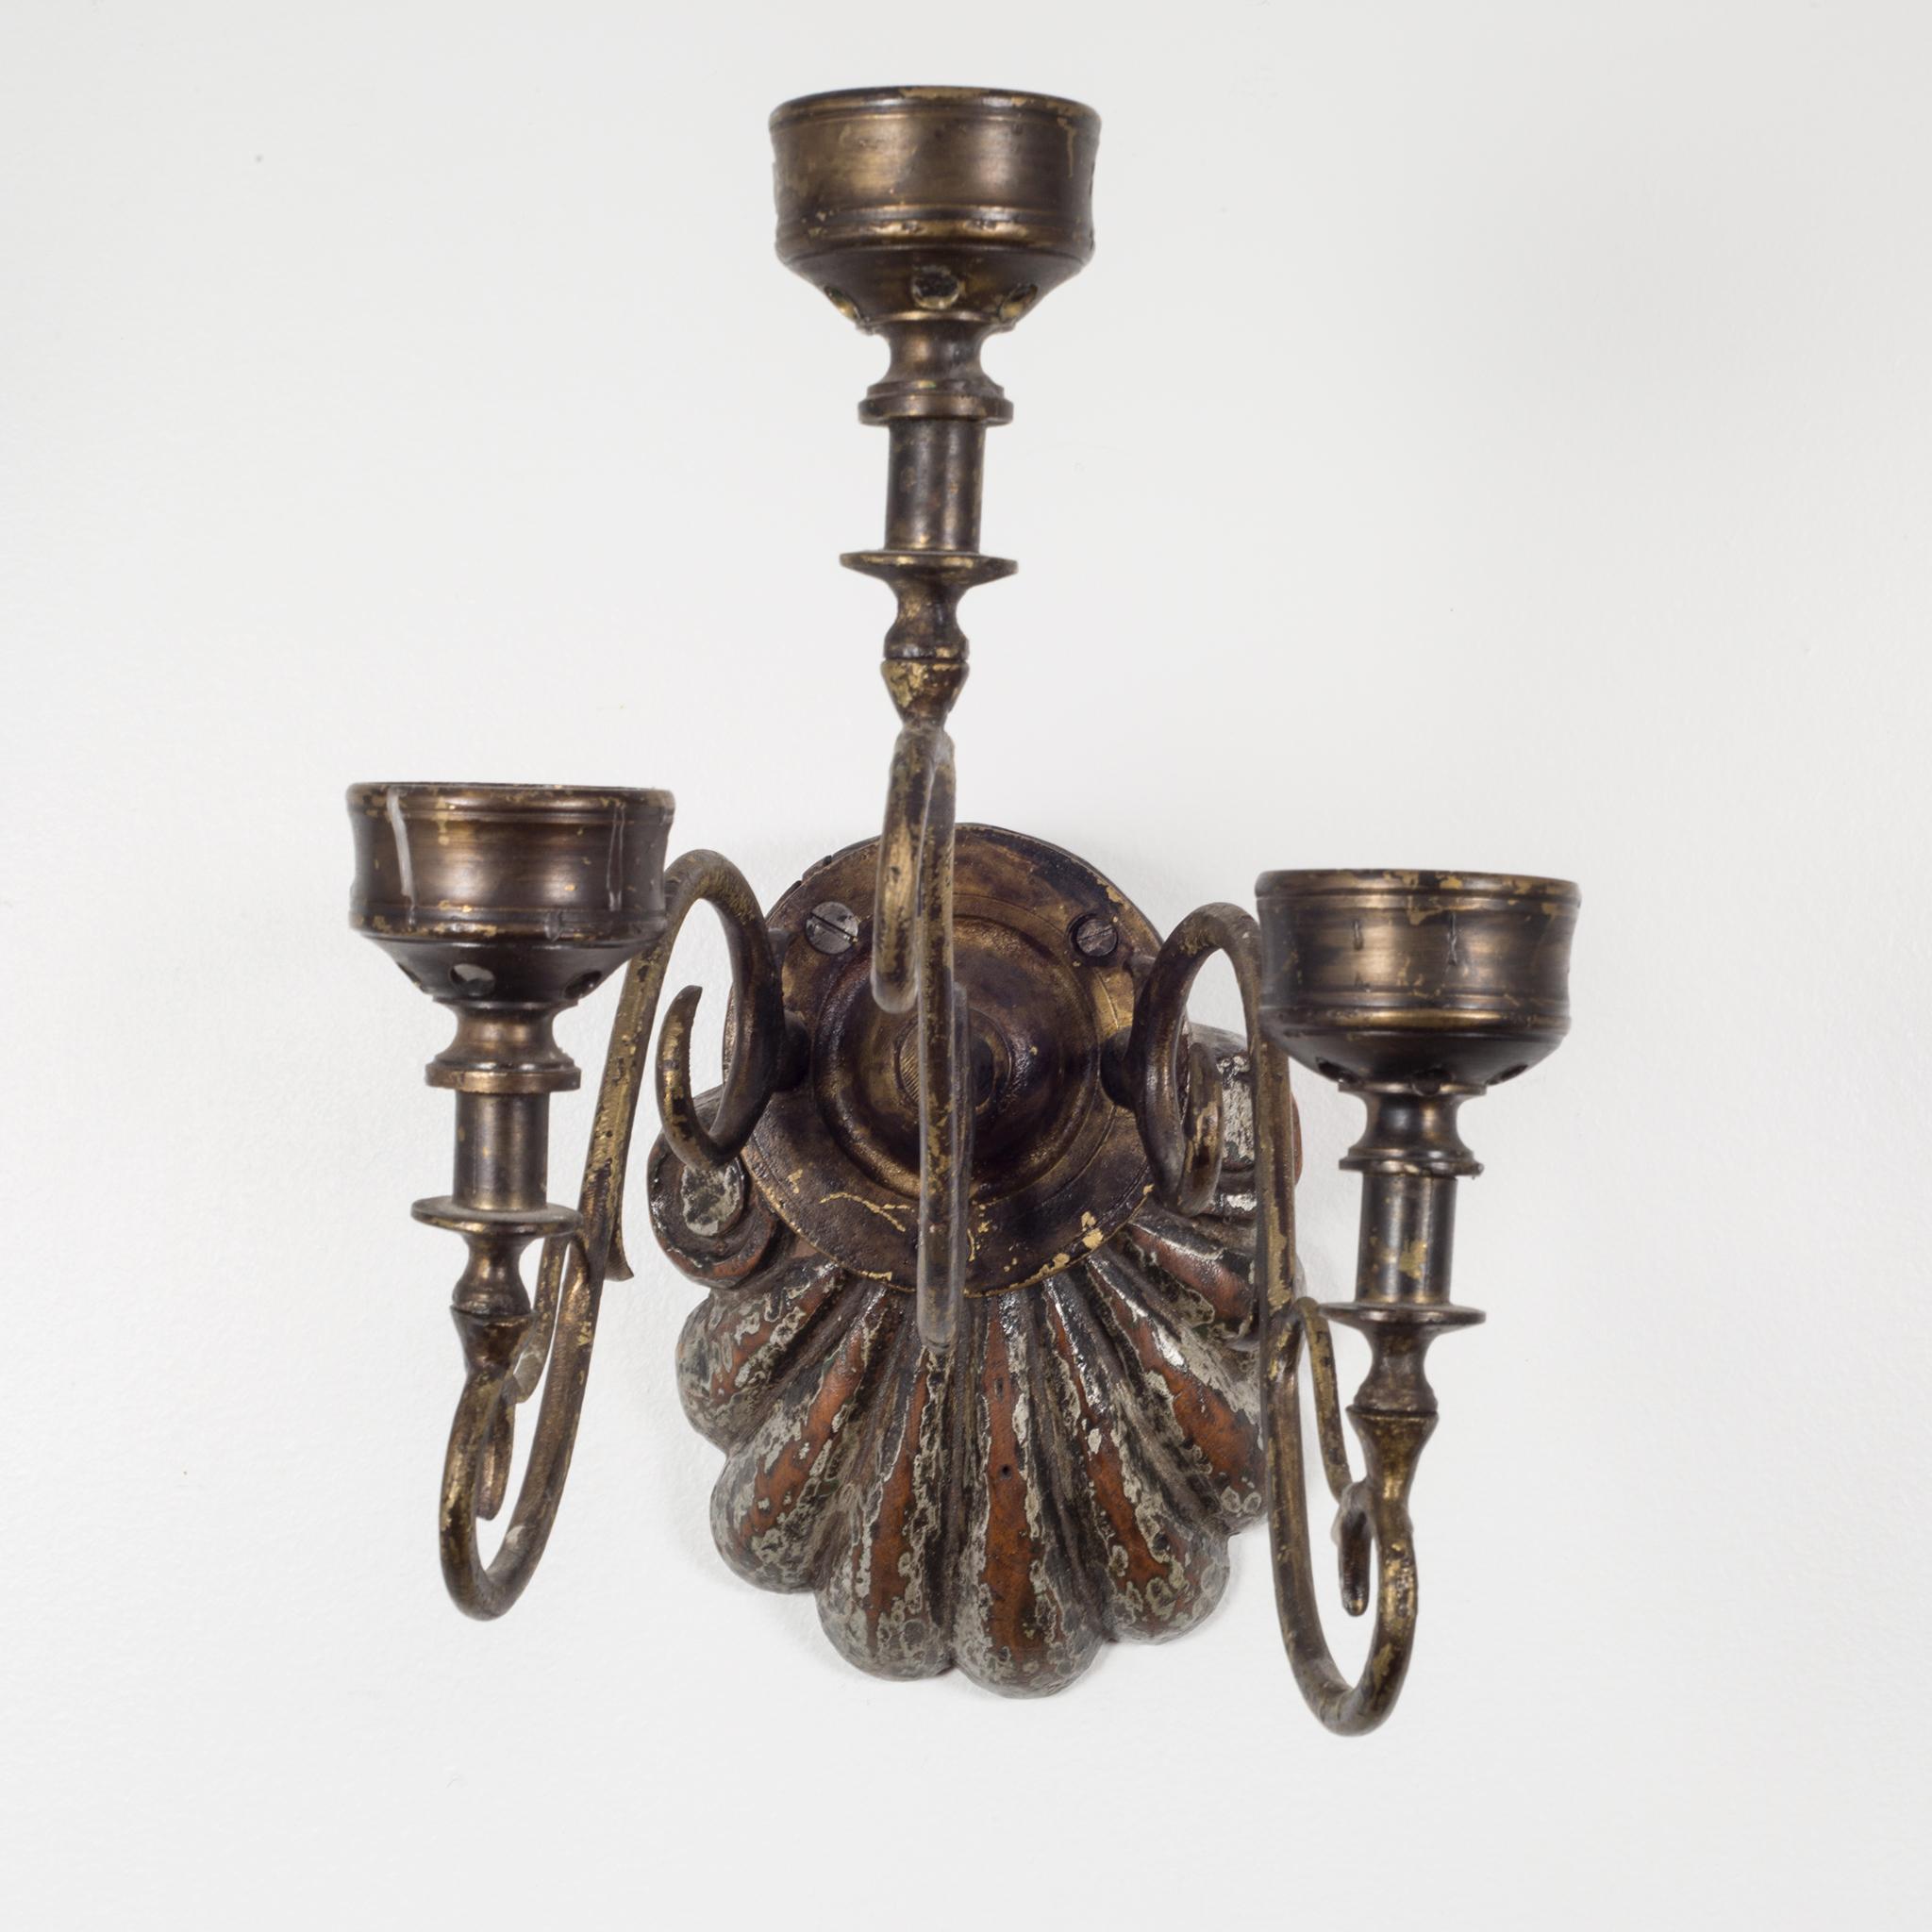 Hand-Painted 19th Century Wall Sconce Candleholders, circa 1800s